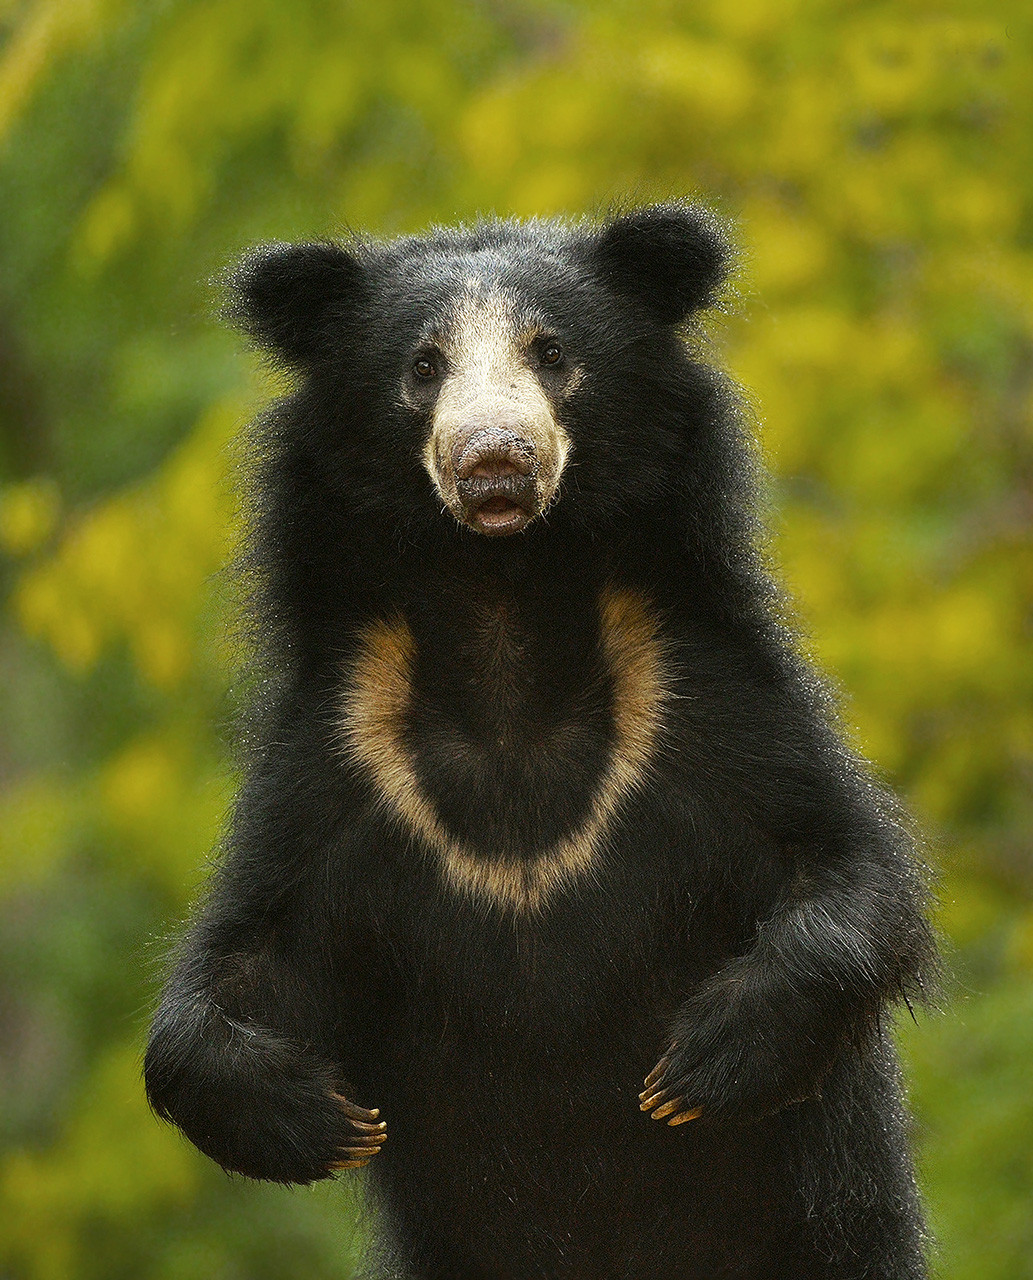 10 Things You Need To Know About Sloth Bears | Nature inFocus